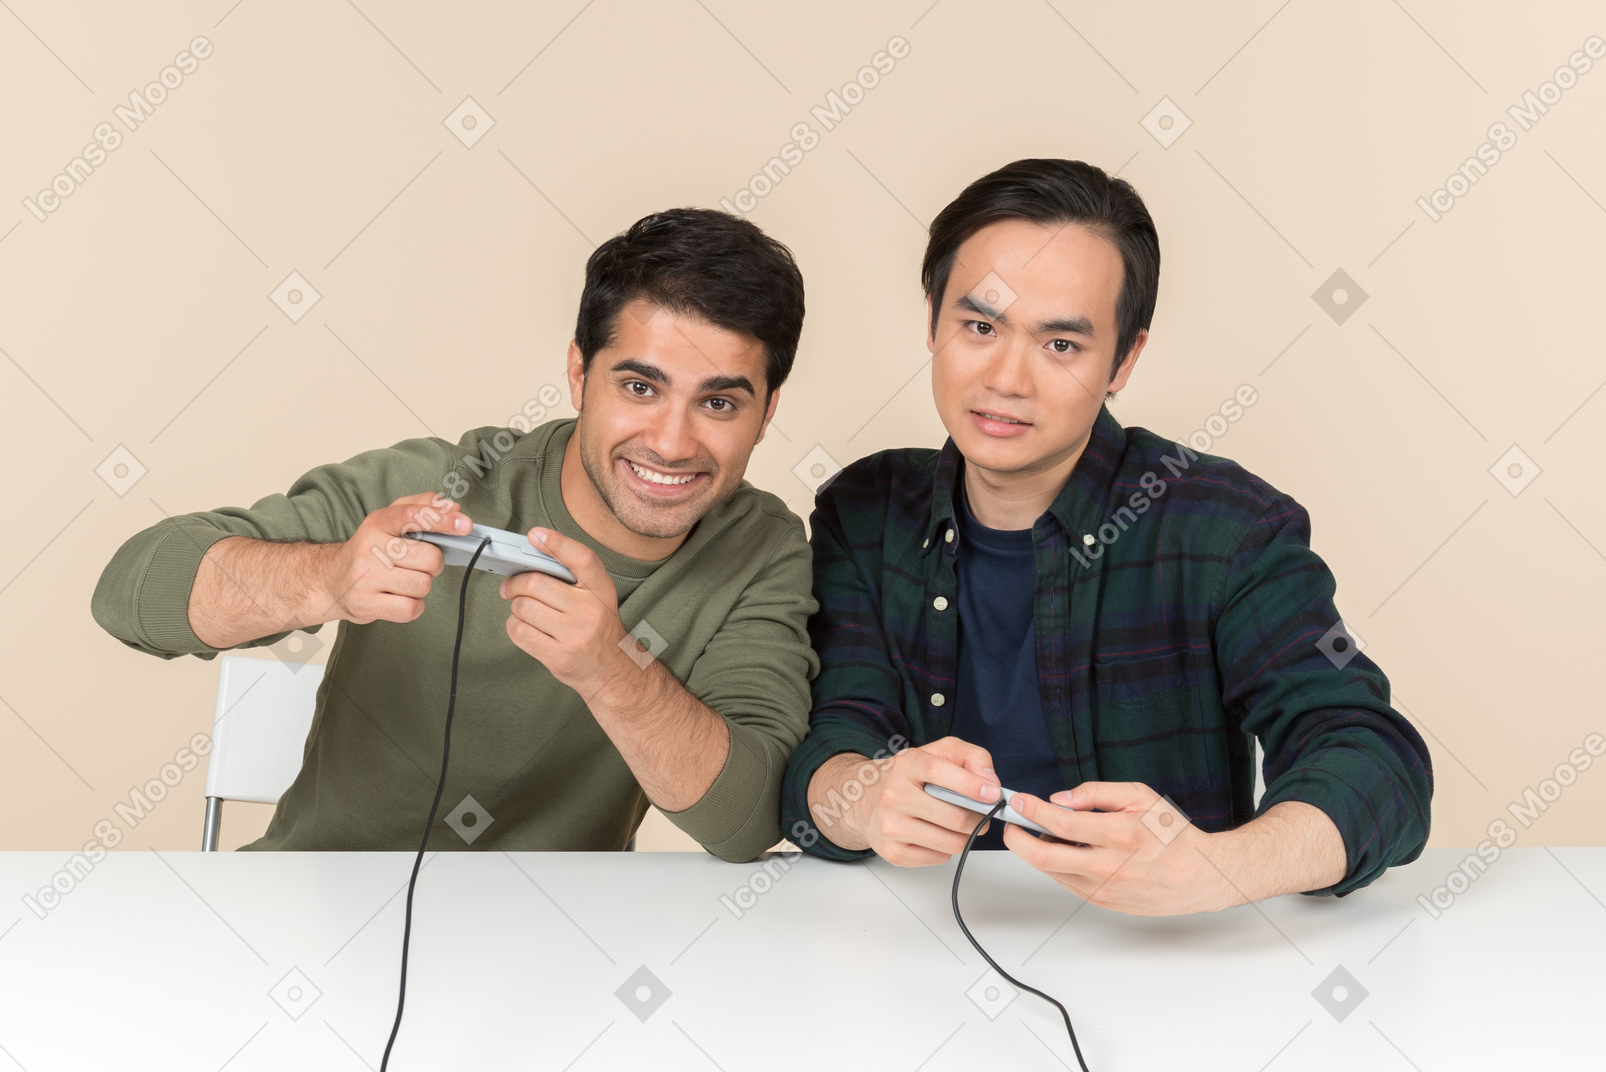 Interracial friends playing video game